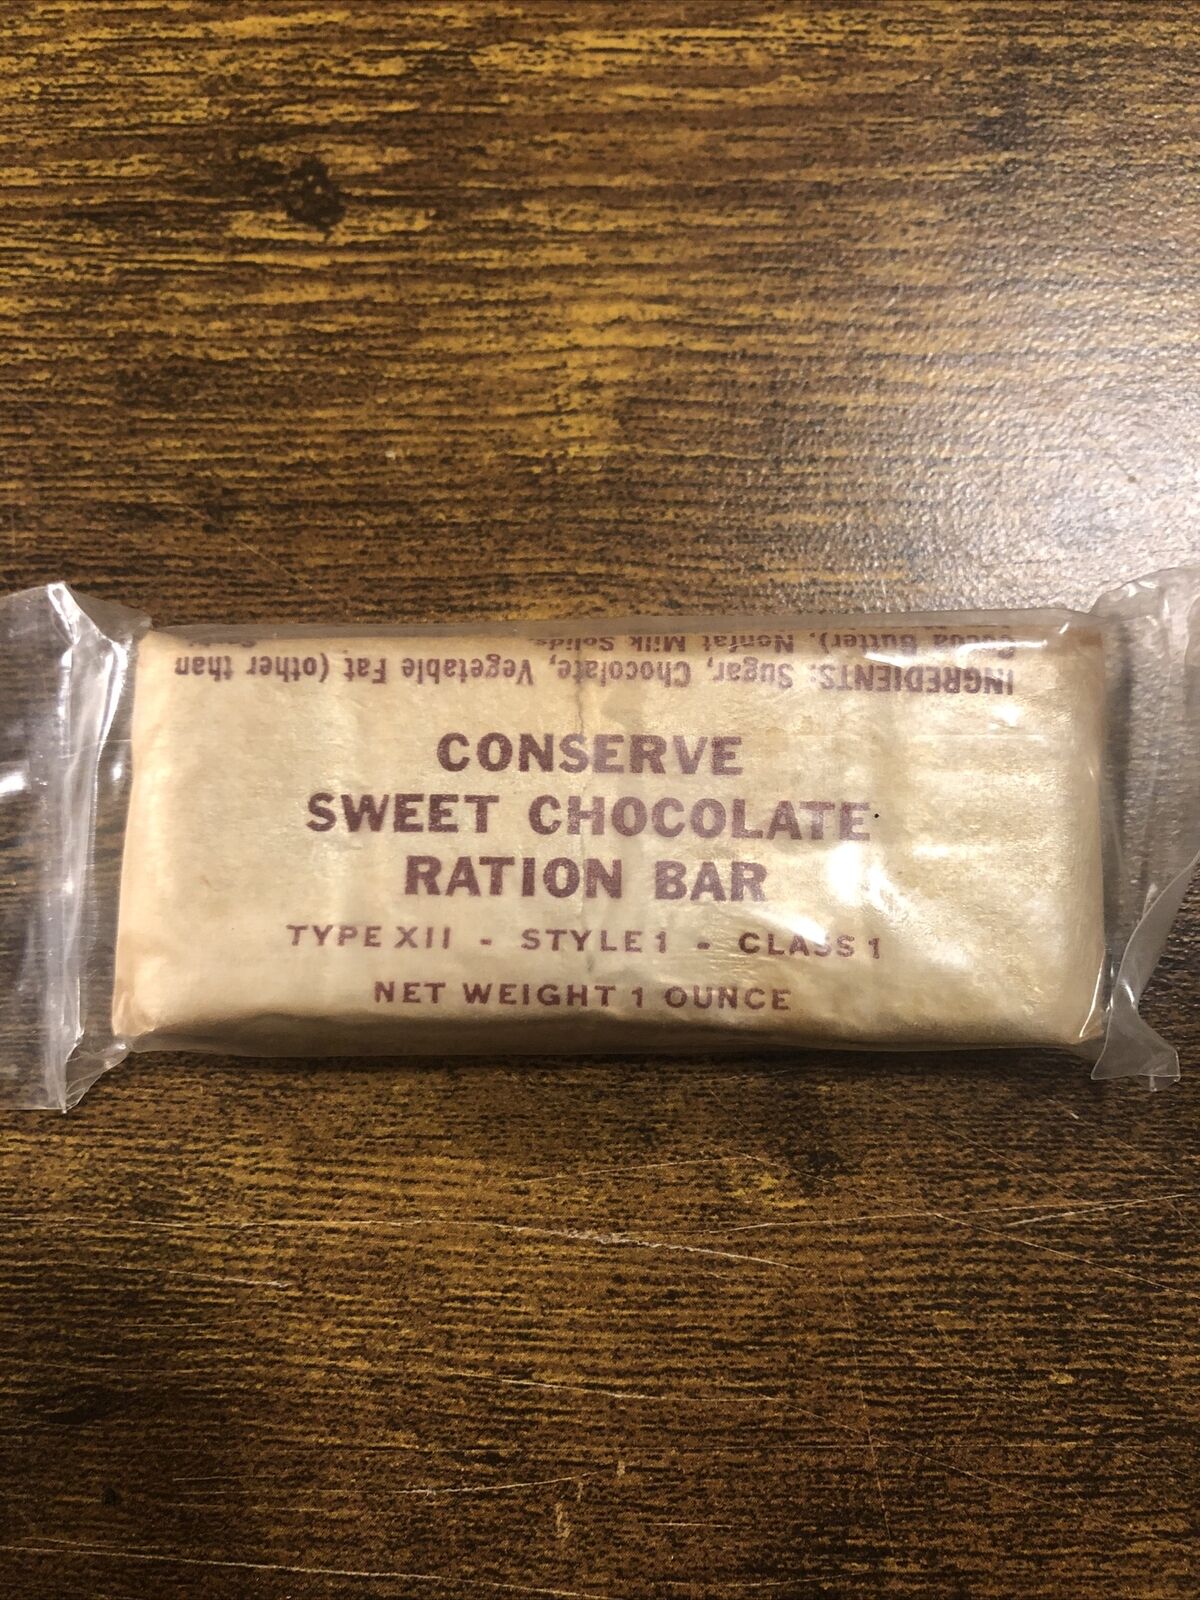 Vietnam War Era Sweet Chocolate Ration Bar From A Military Survival Kit Sealed